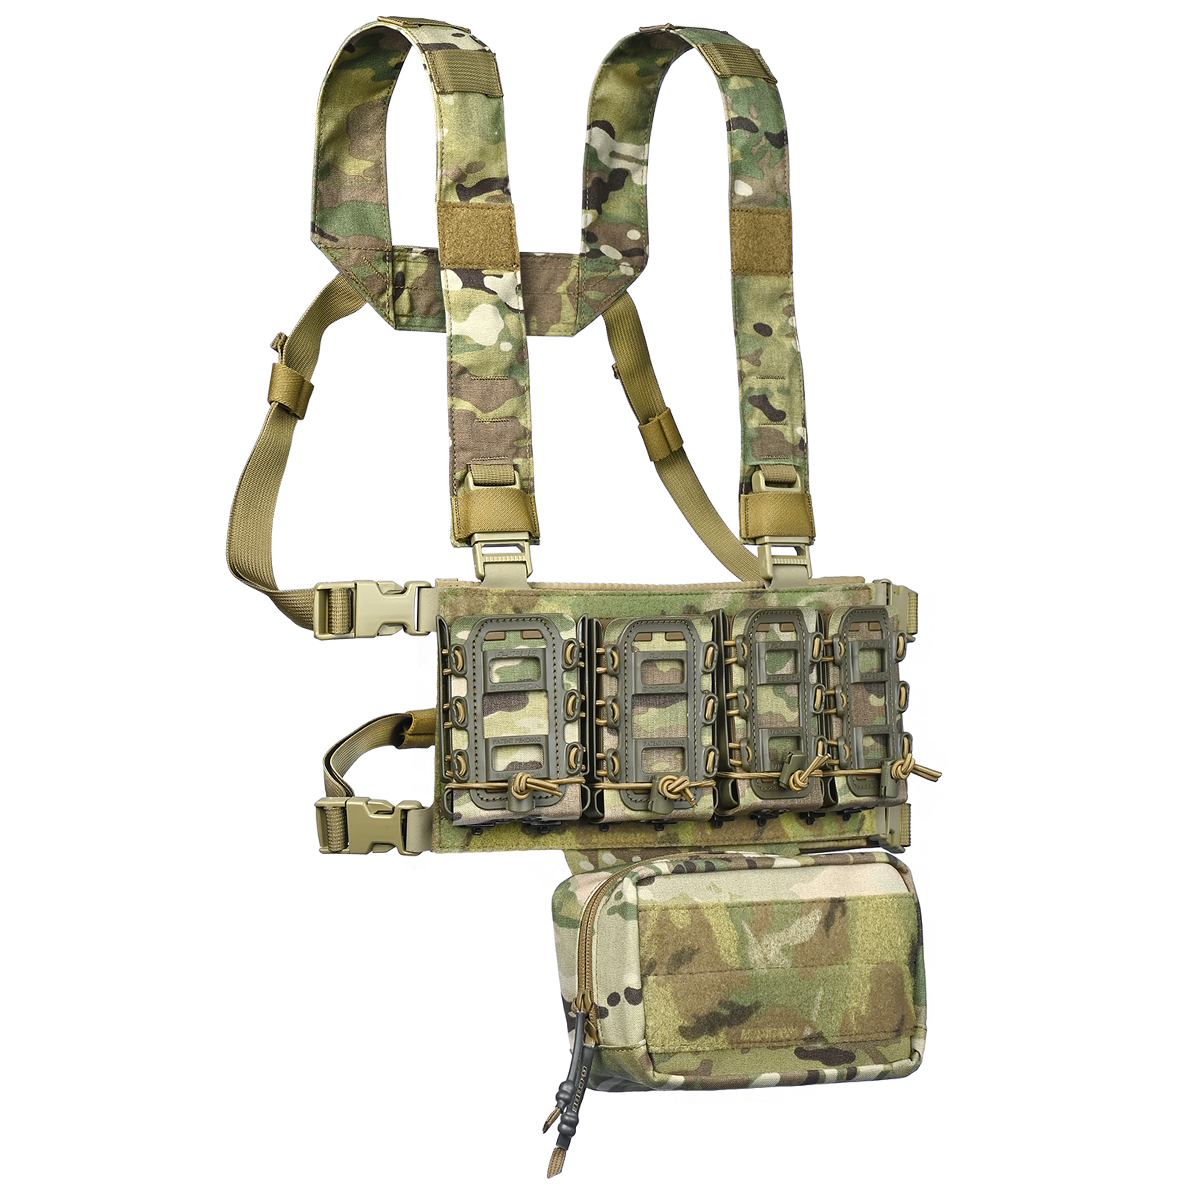 Sync 4Zero 4x0 Chest Rig & Mag Carriers : G-Code Holsters